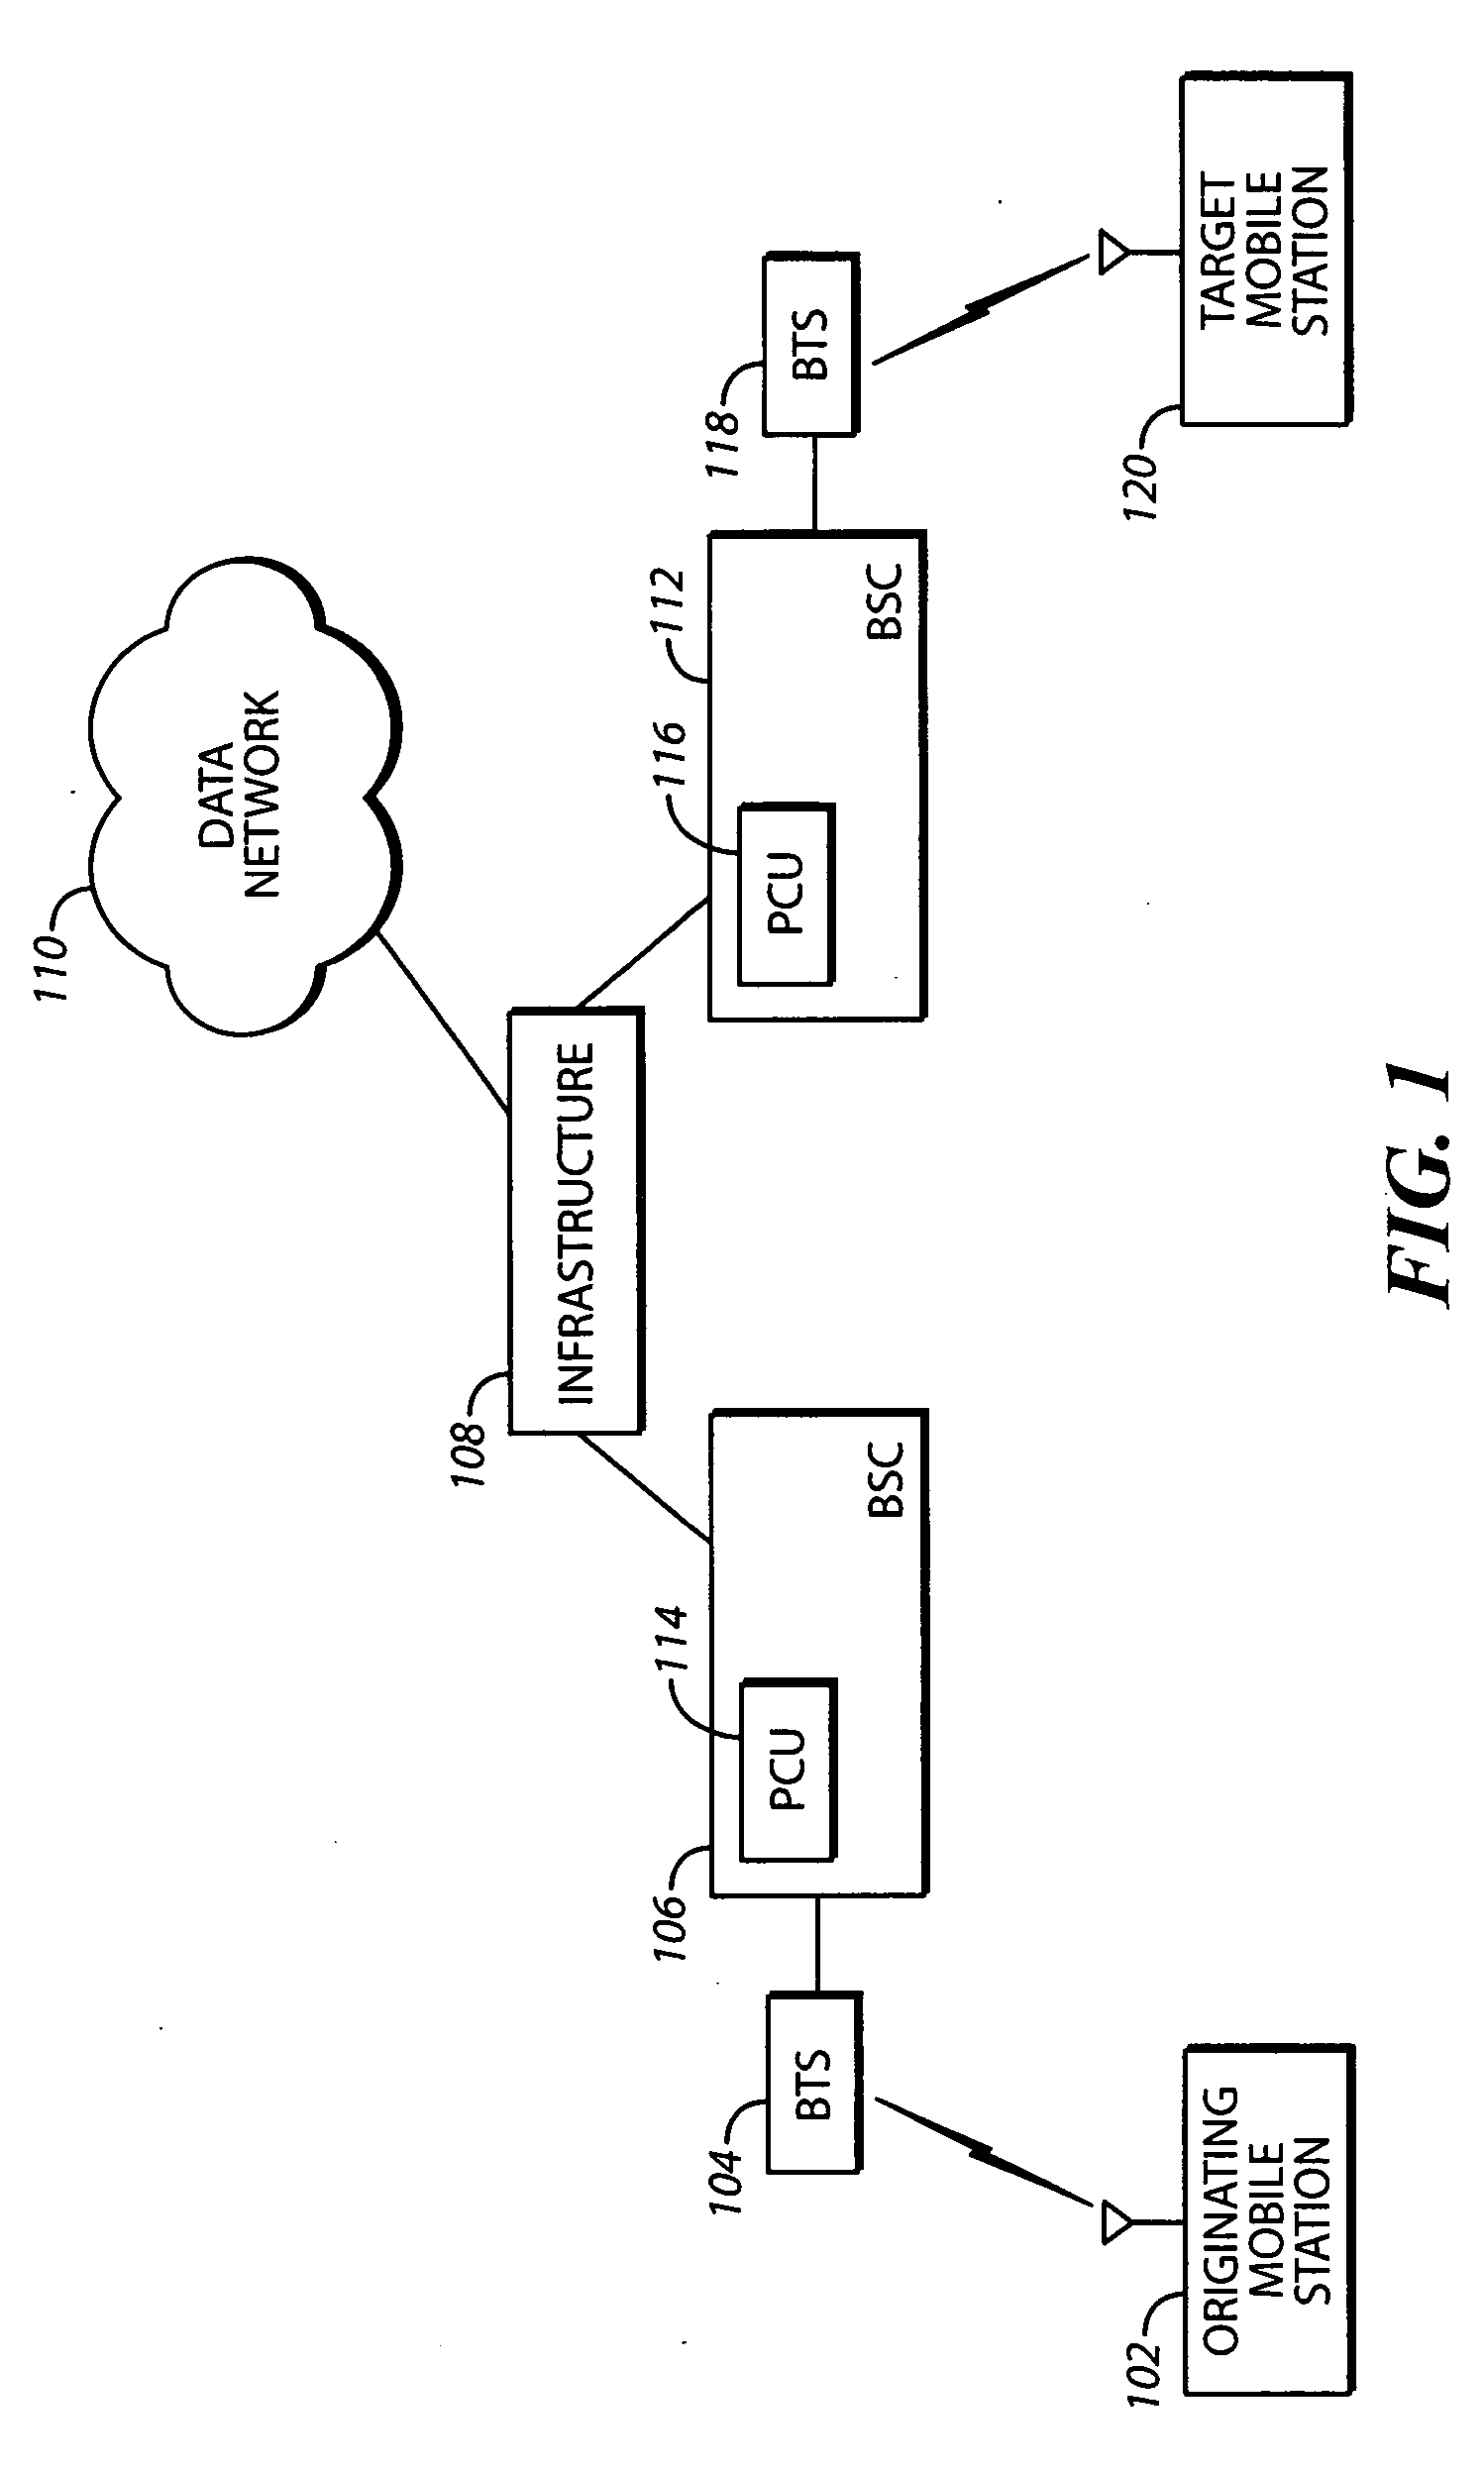 System and method for expedited communications between mobile stations